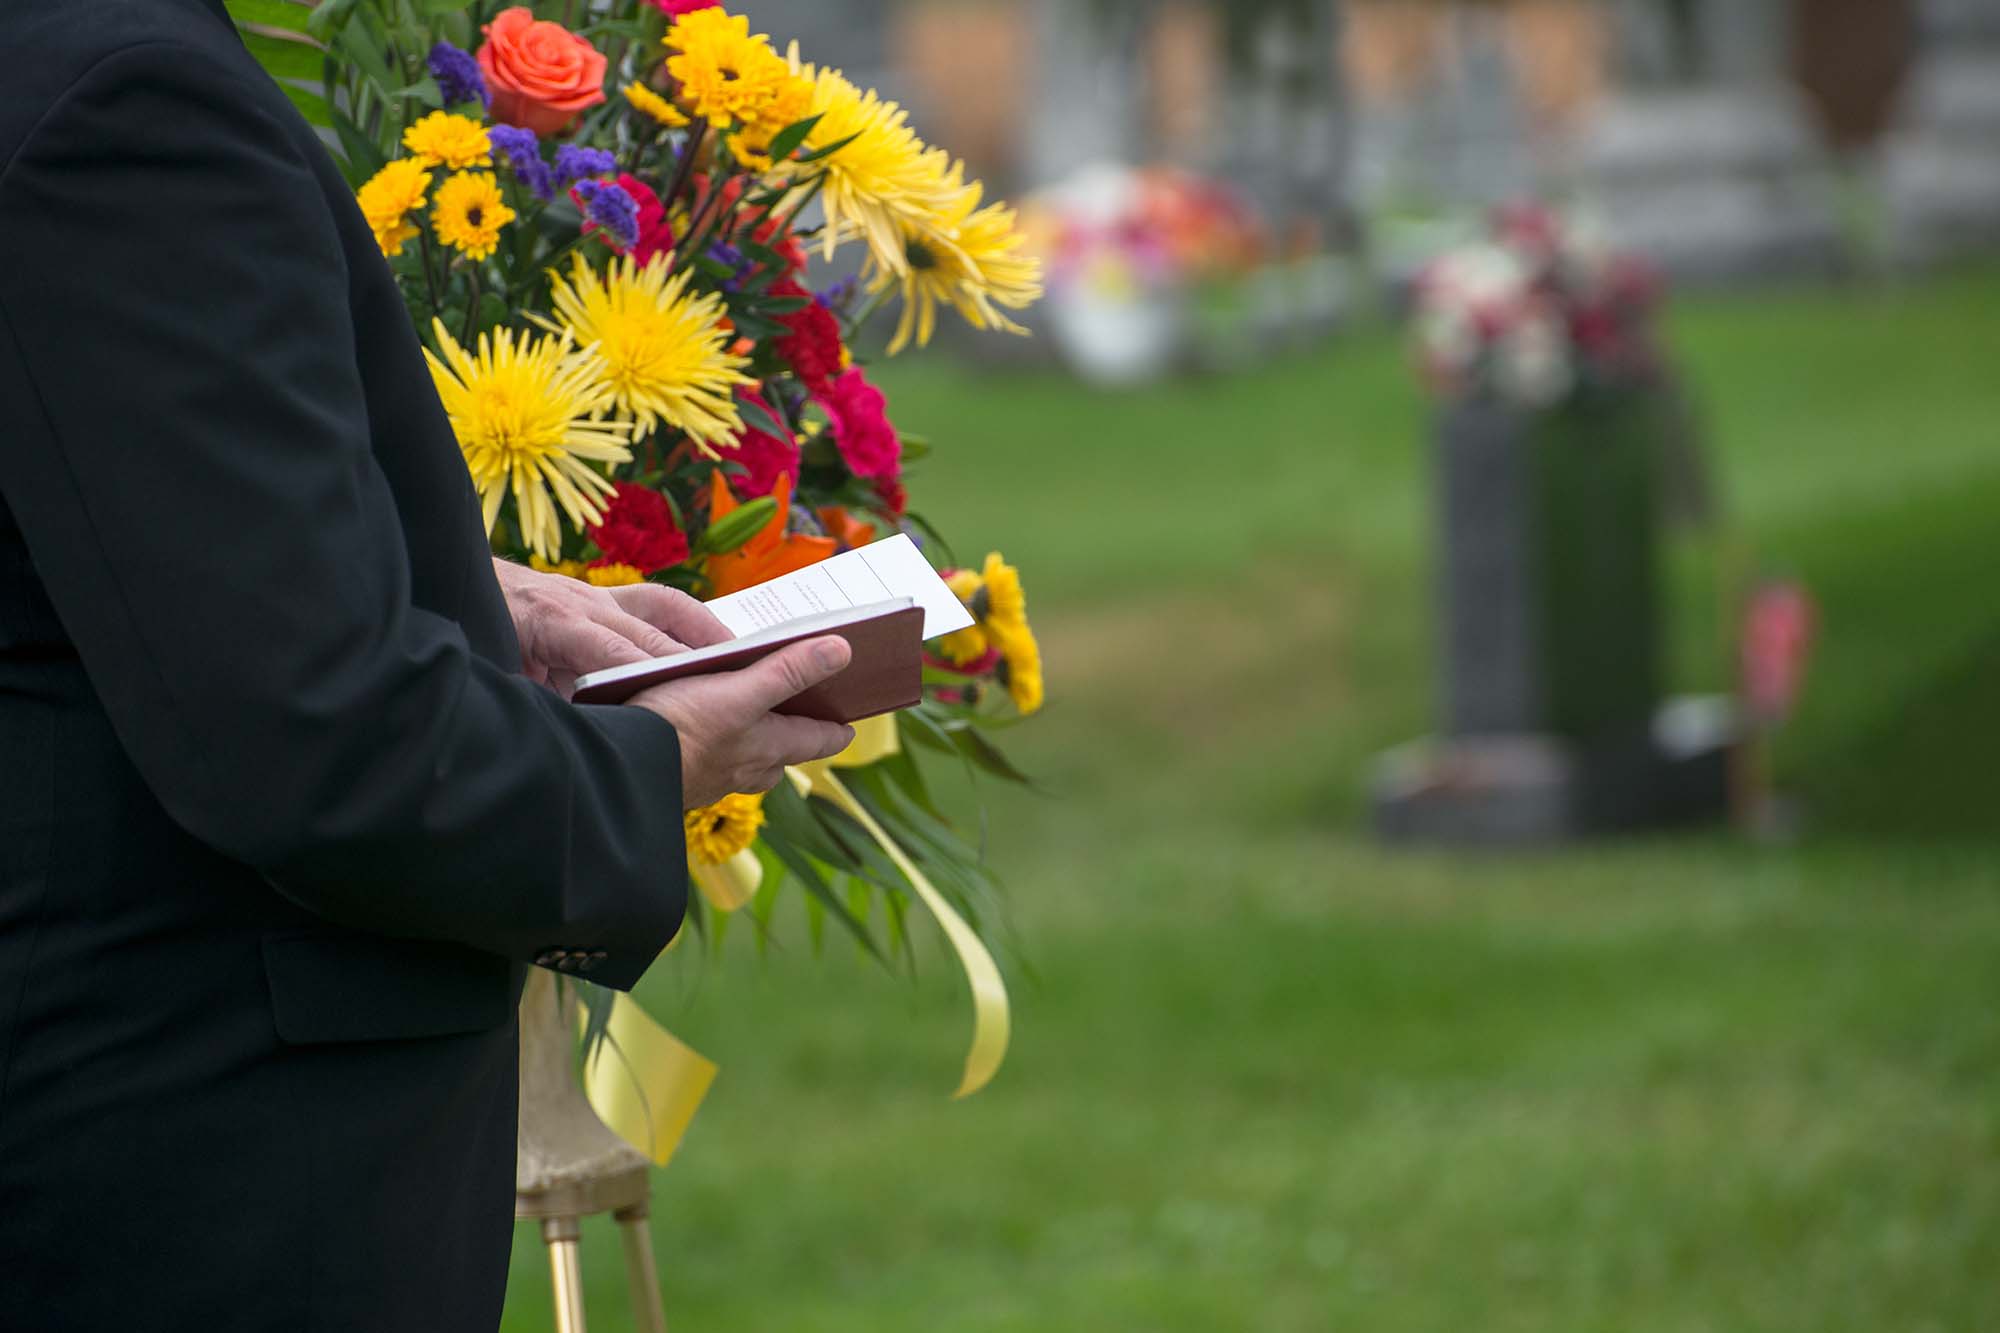 A pastor or minister reads from the Bible during a funeral burial memorial service at a cemetery. Death and grief are a fact of life.